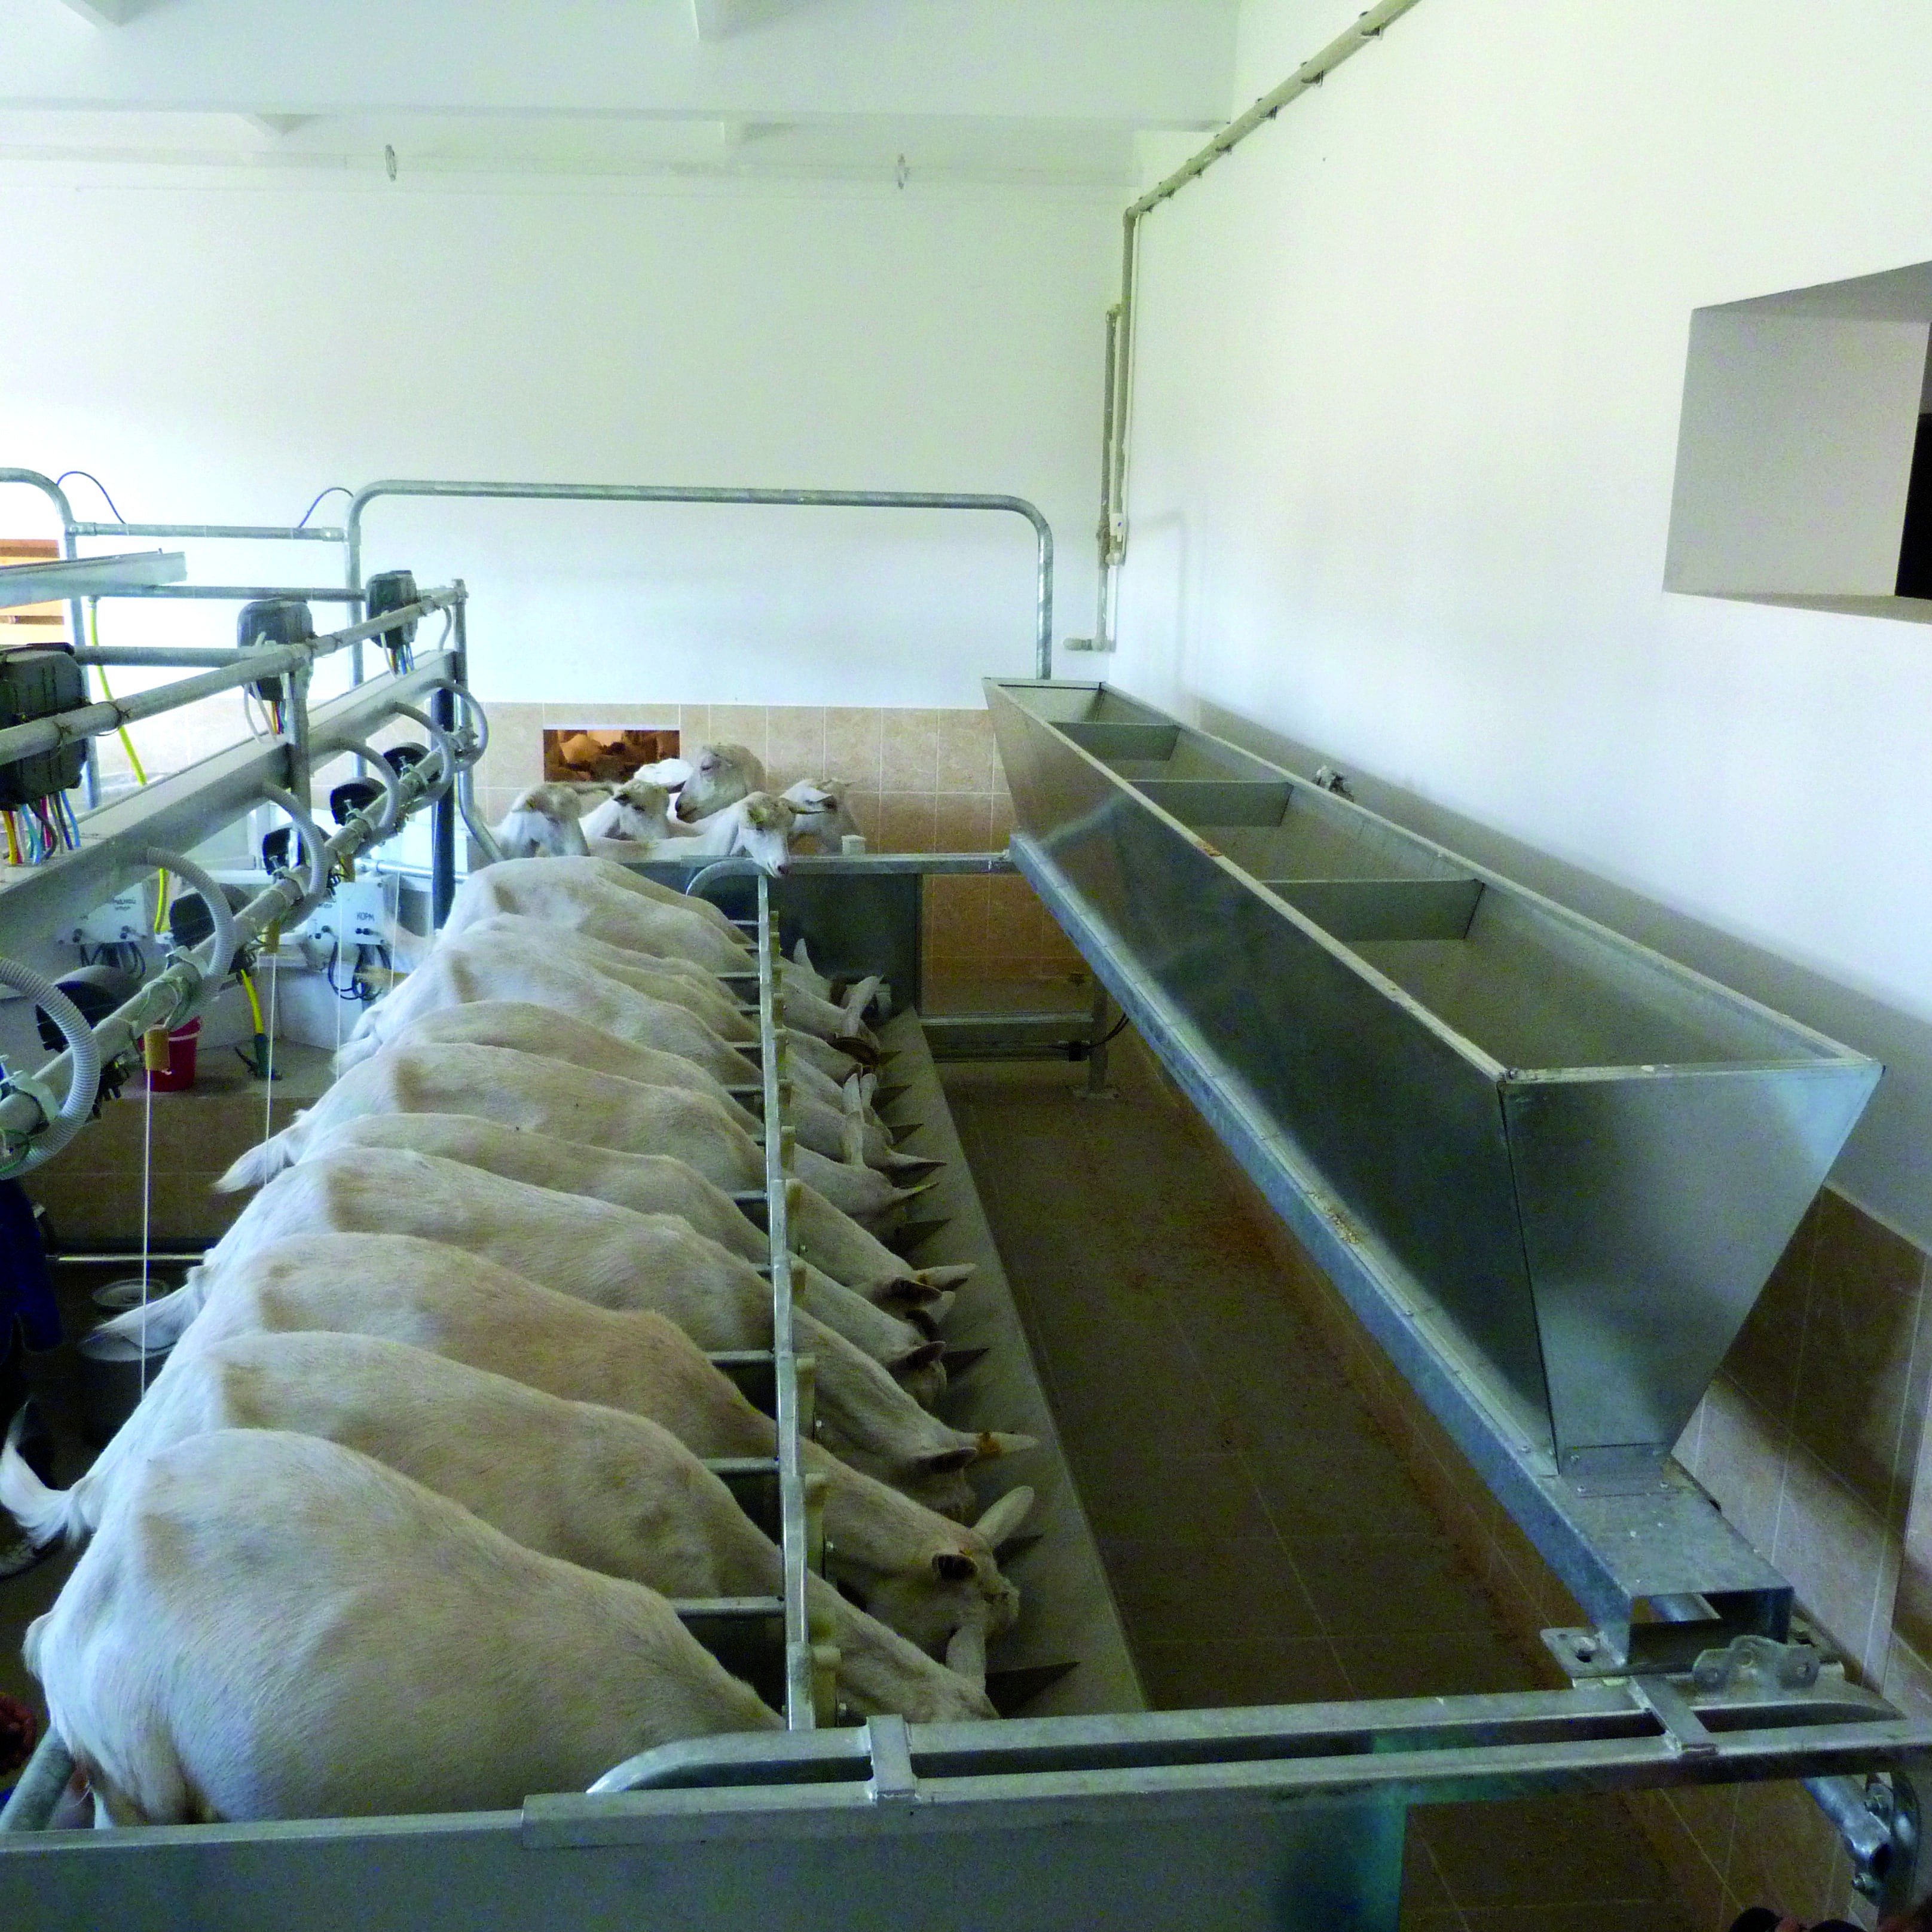 Parallel parlour with side exit